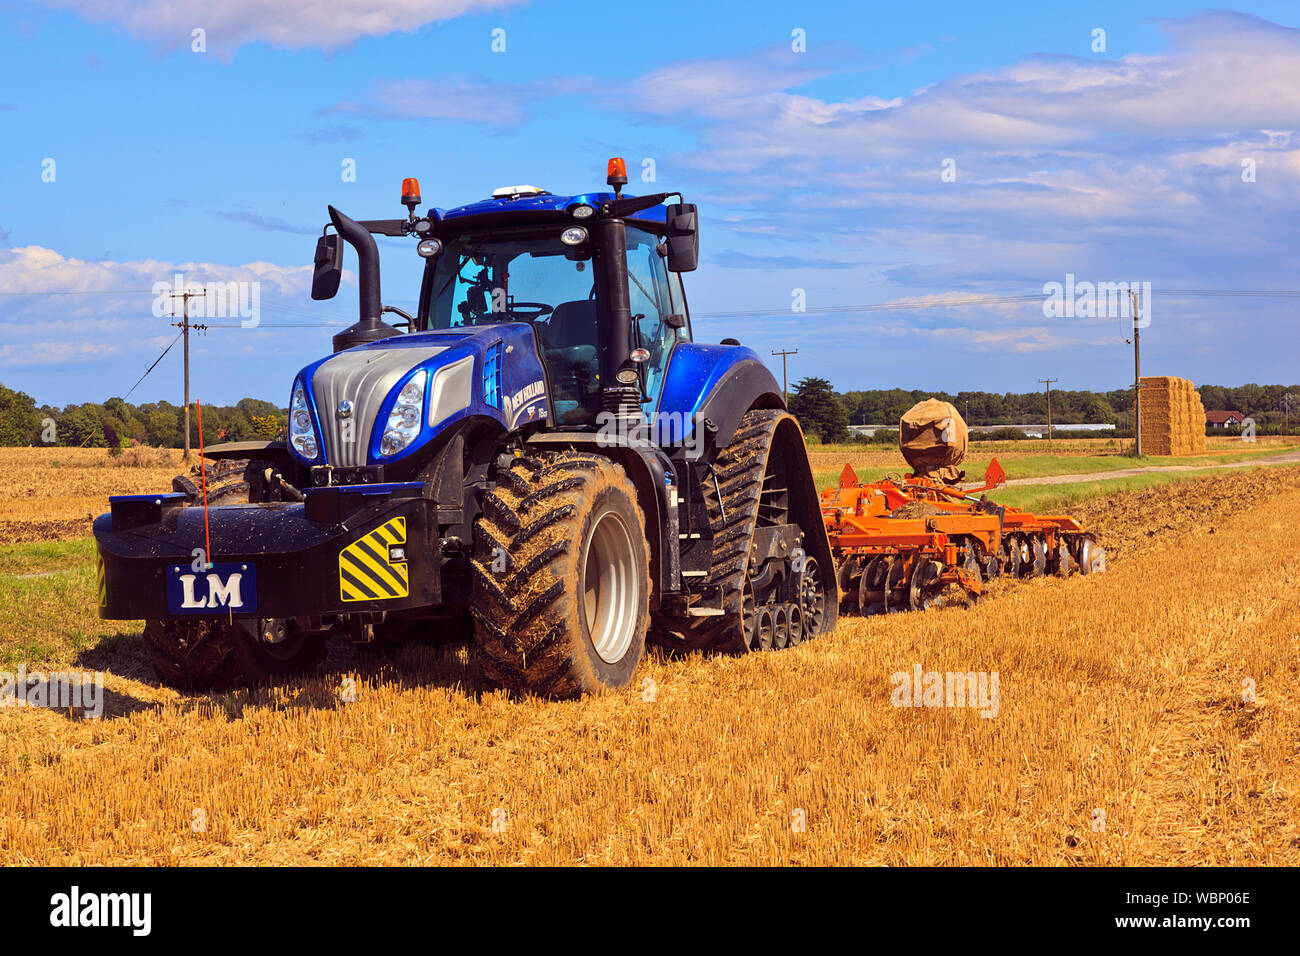 new-holland-t8435-tracked-tractor-cultivating-field-with-mechanical-cultivator-in-lincolnshire-WBP06E.jpg